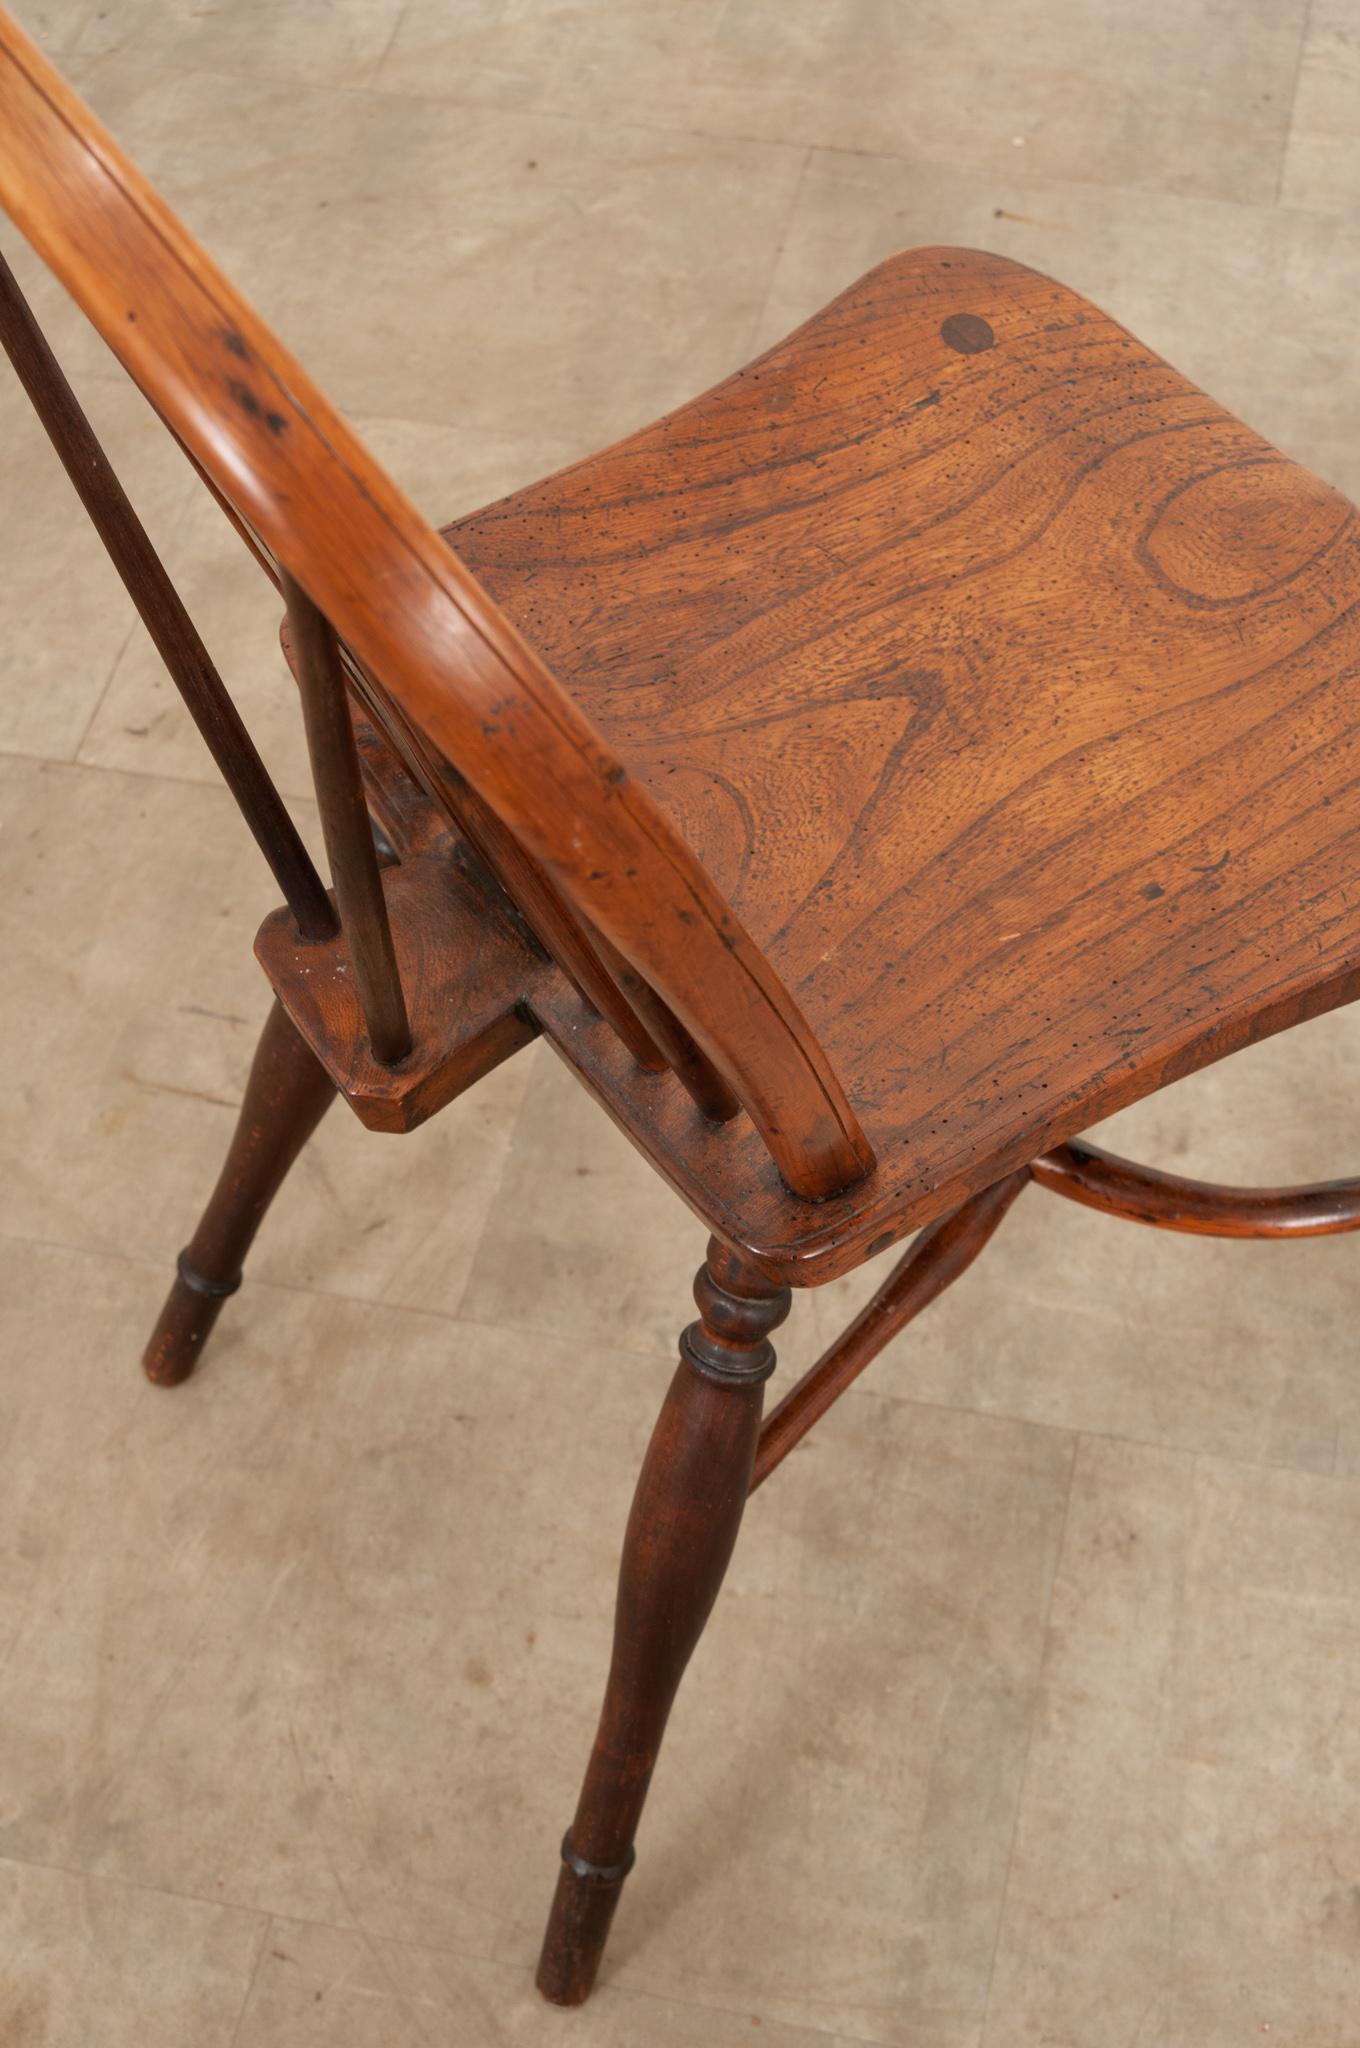 Early 19th Century Wheelback Windsor Chair In Good Condition For Sale In Baton Rouge, LA